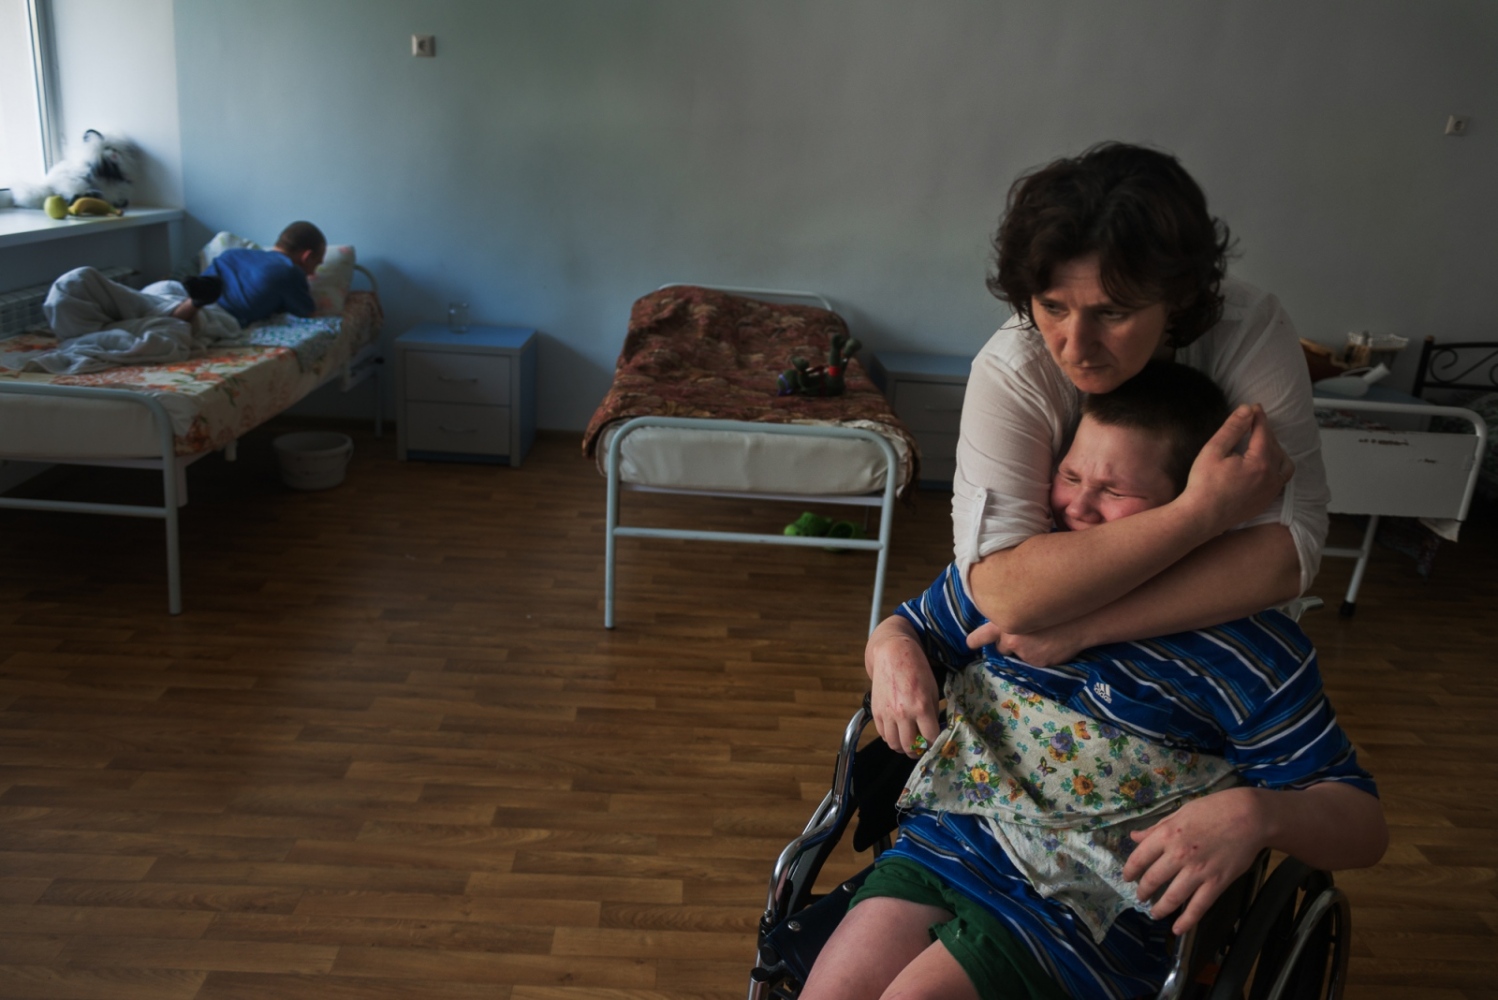 Pitomnik: Ukraine's forgotten - While many of the nannies can be indifferent or...